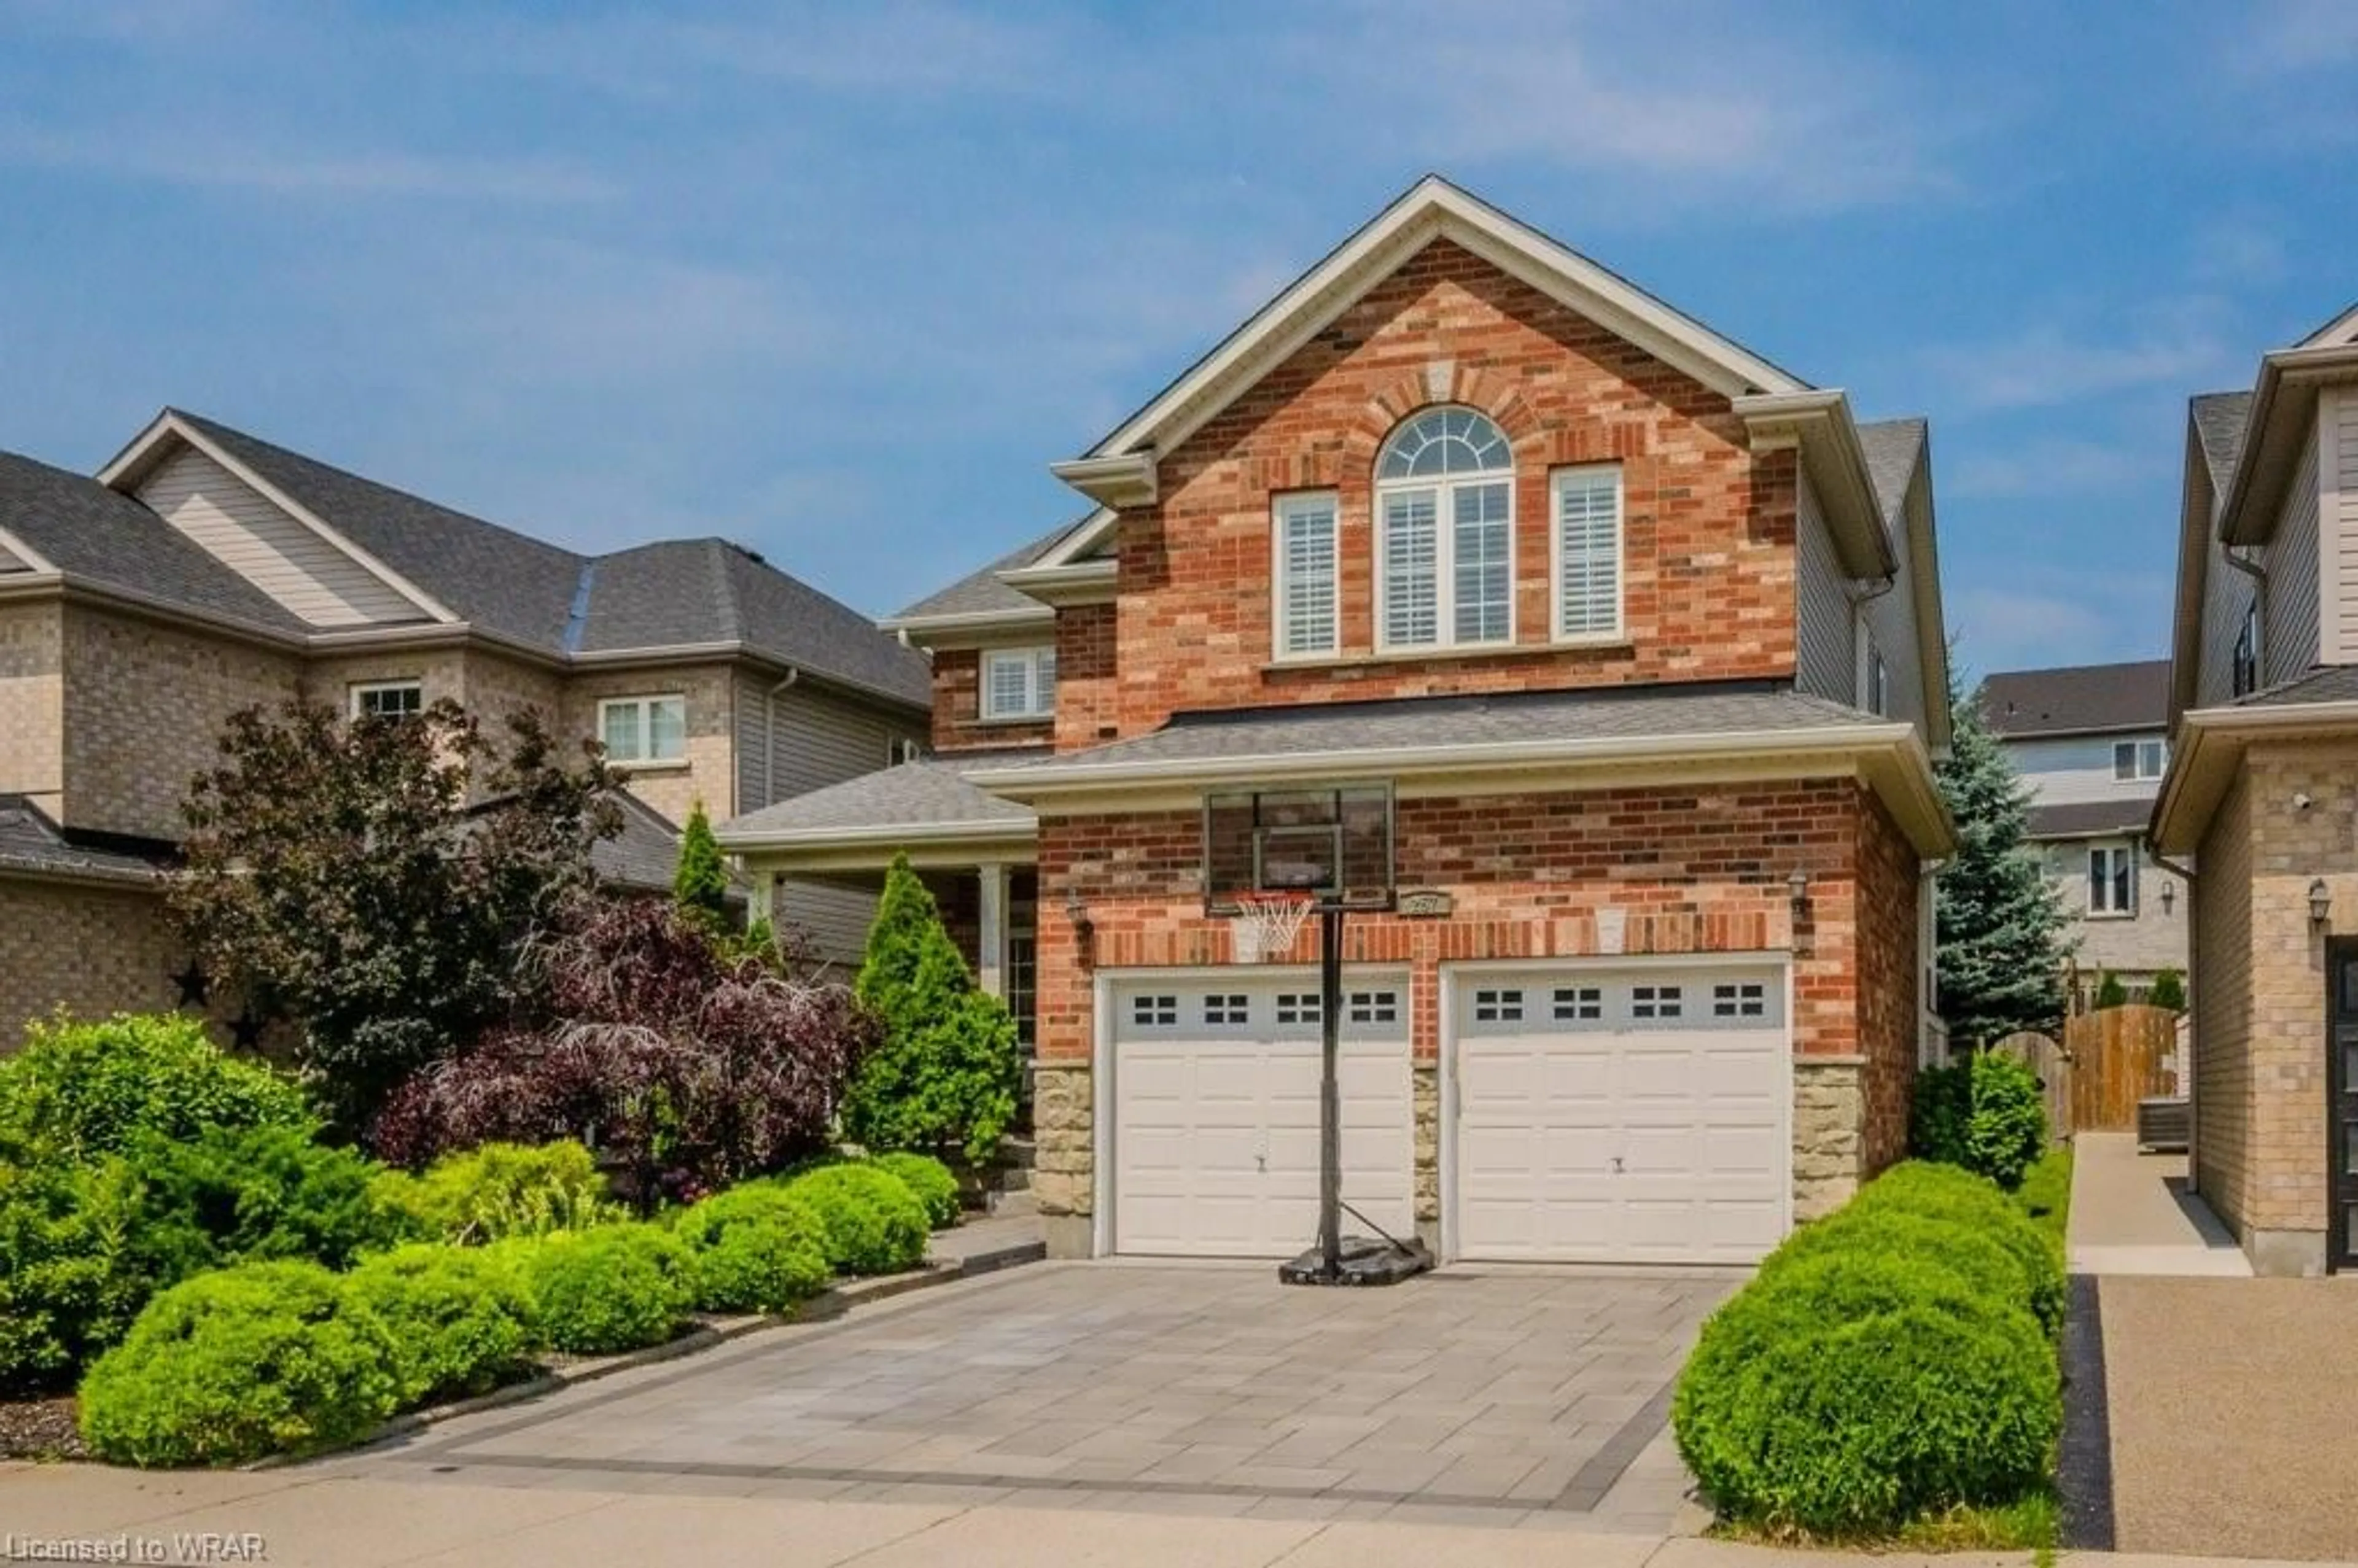 Home with brick exterior material for 257 Ridgemere Crt, Kitchener Ontario N2P 2W6